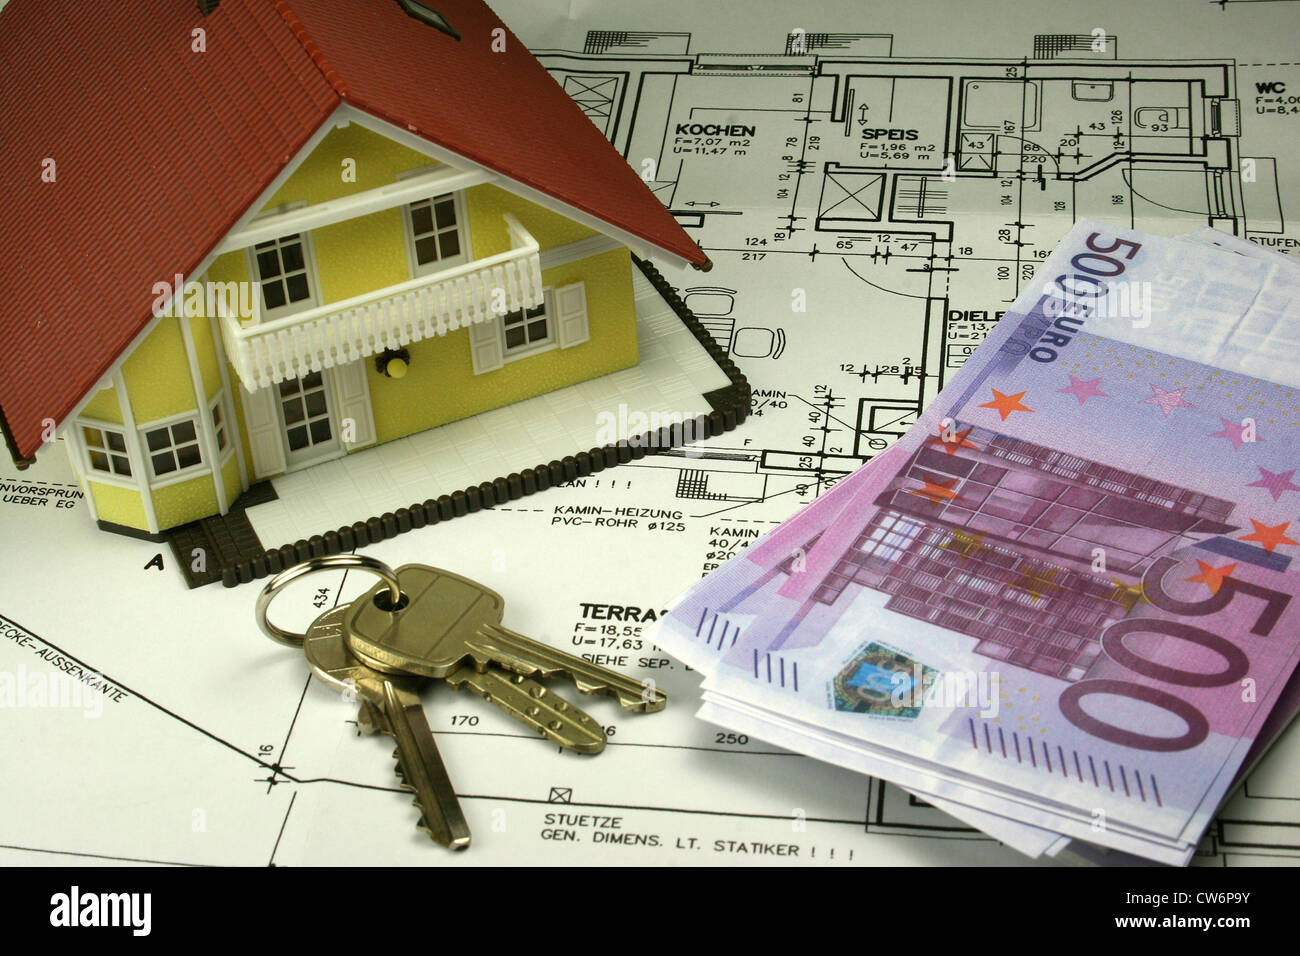 private residential building model, euros and keys Stock Photo